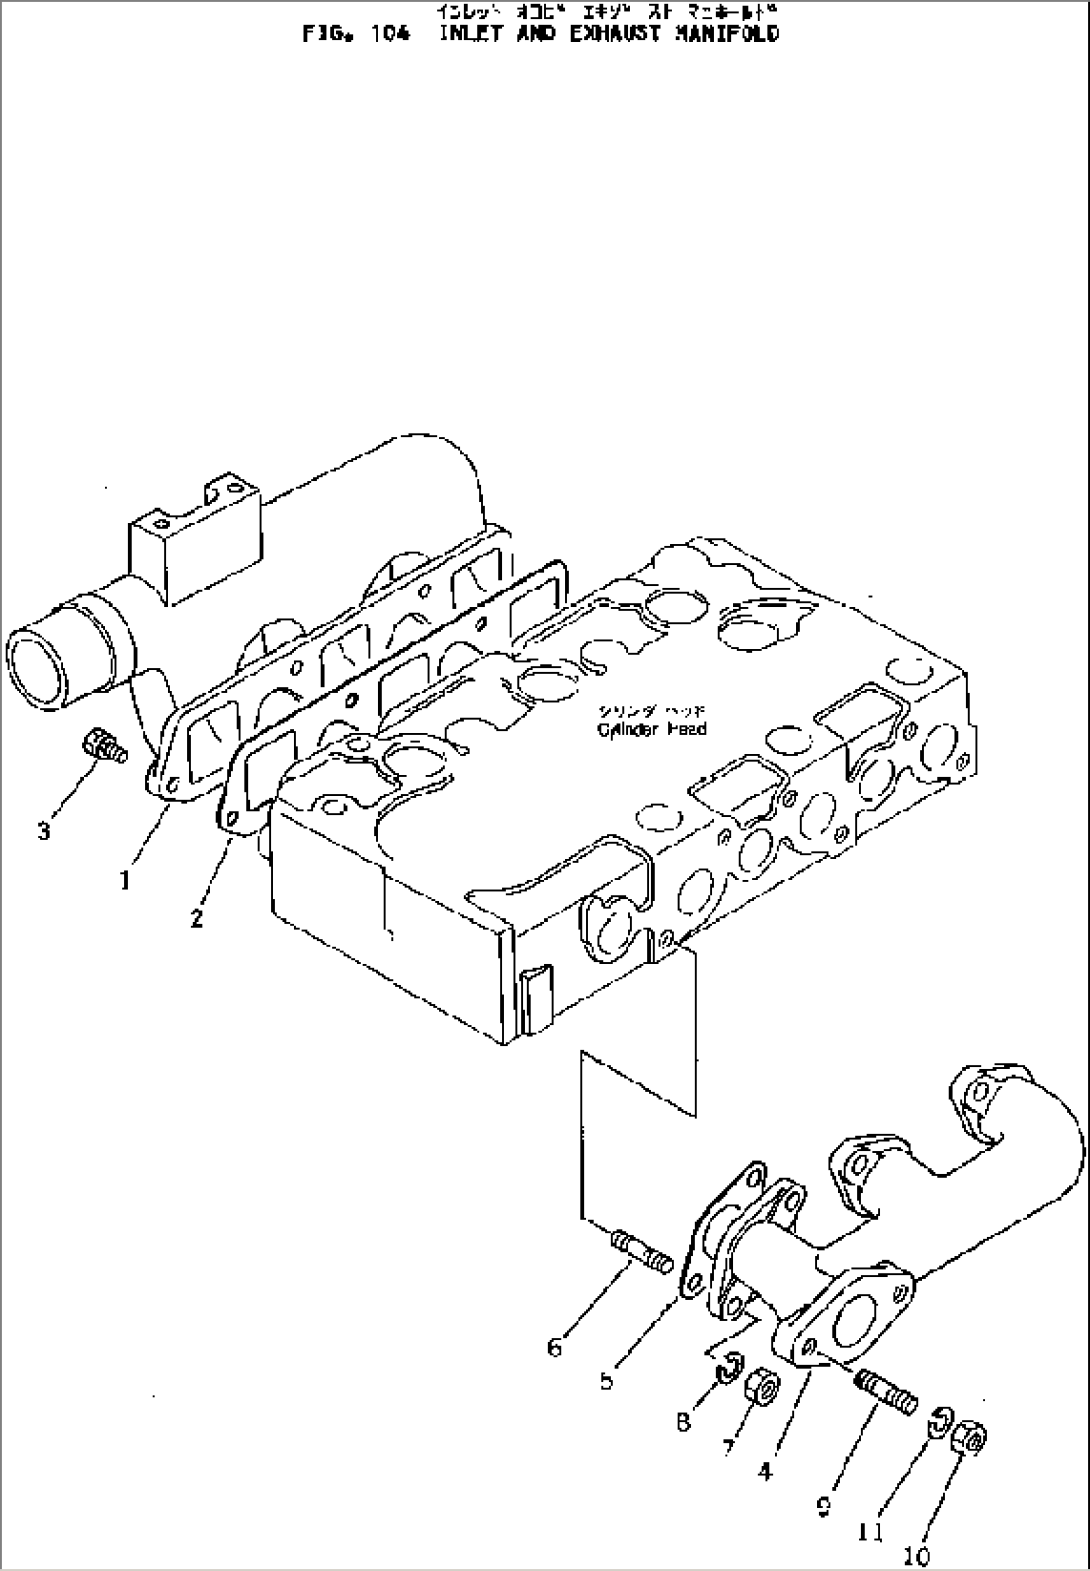 INLET AND EXHAUST MANIFOLD